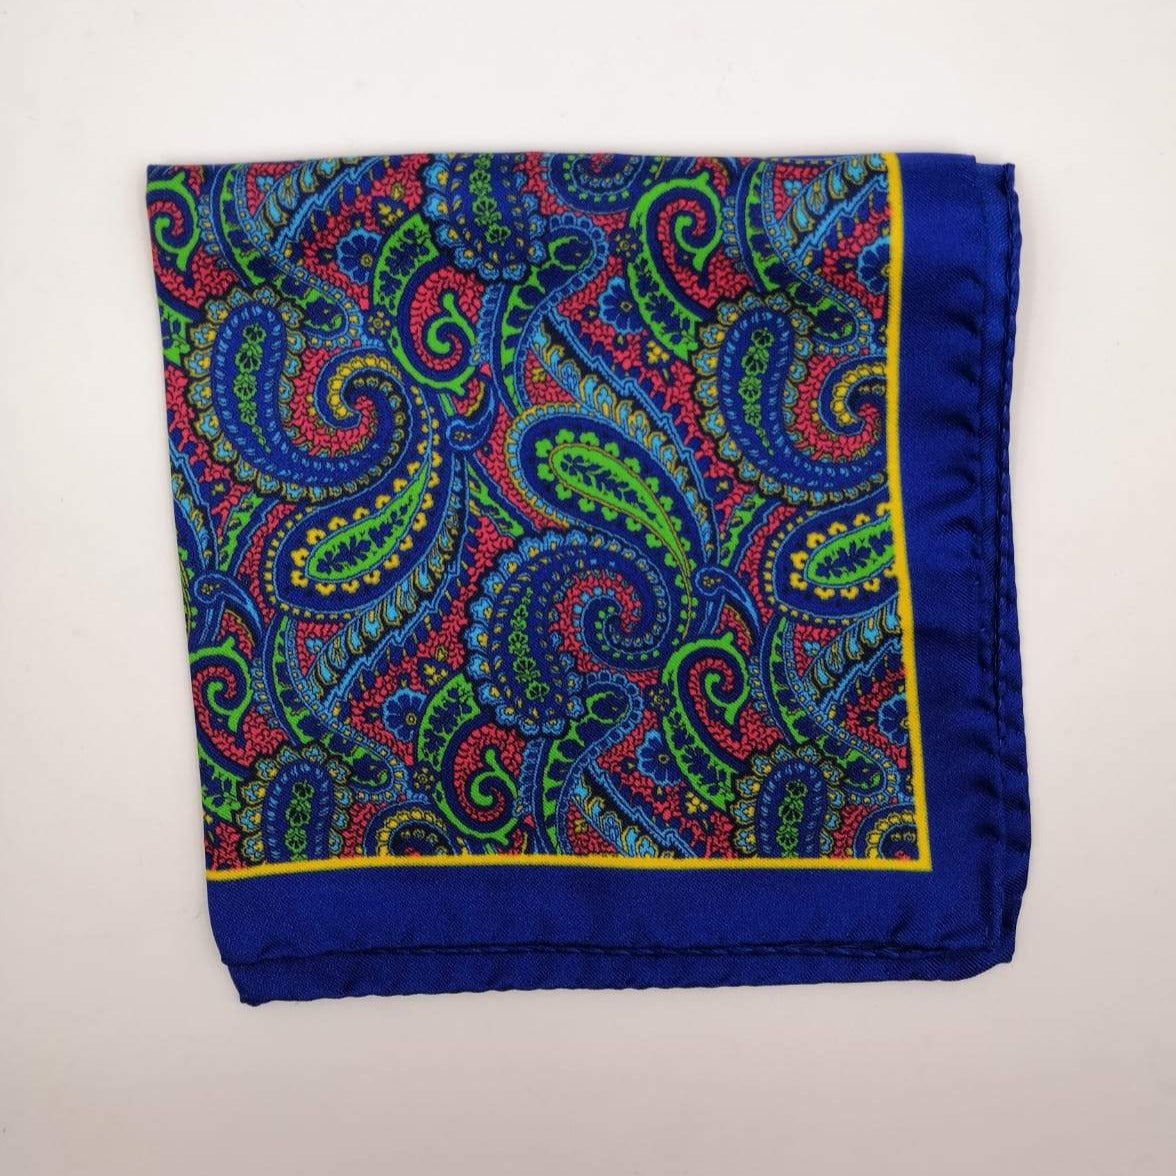 Cruciani & Bella 100% Silk Hand-rolled  Blue  and Multicolor Paisley Motif  Pocket Square Handmade in Italy 34cm X 34cm #0729